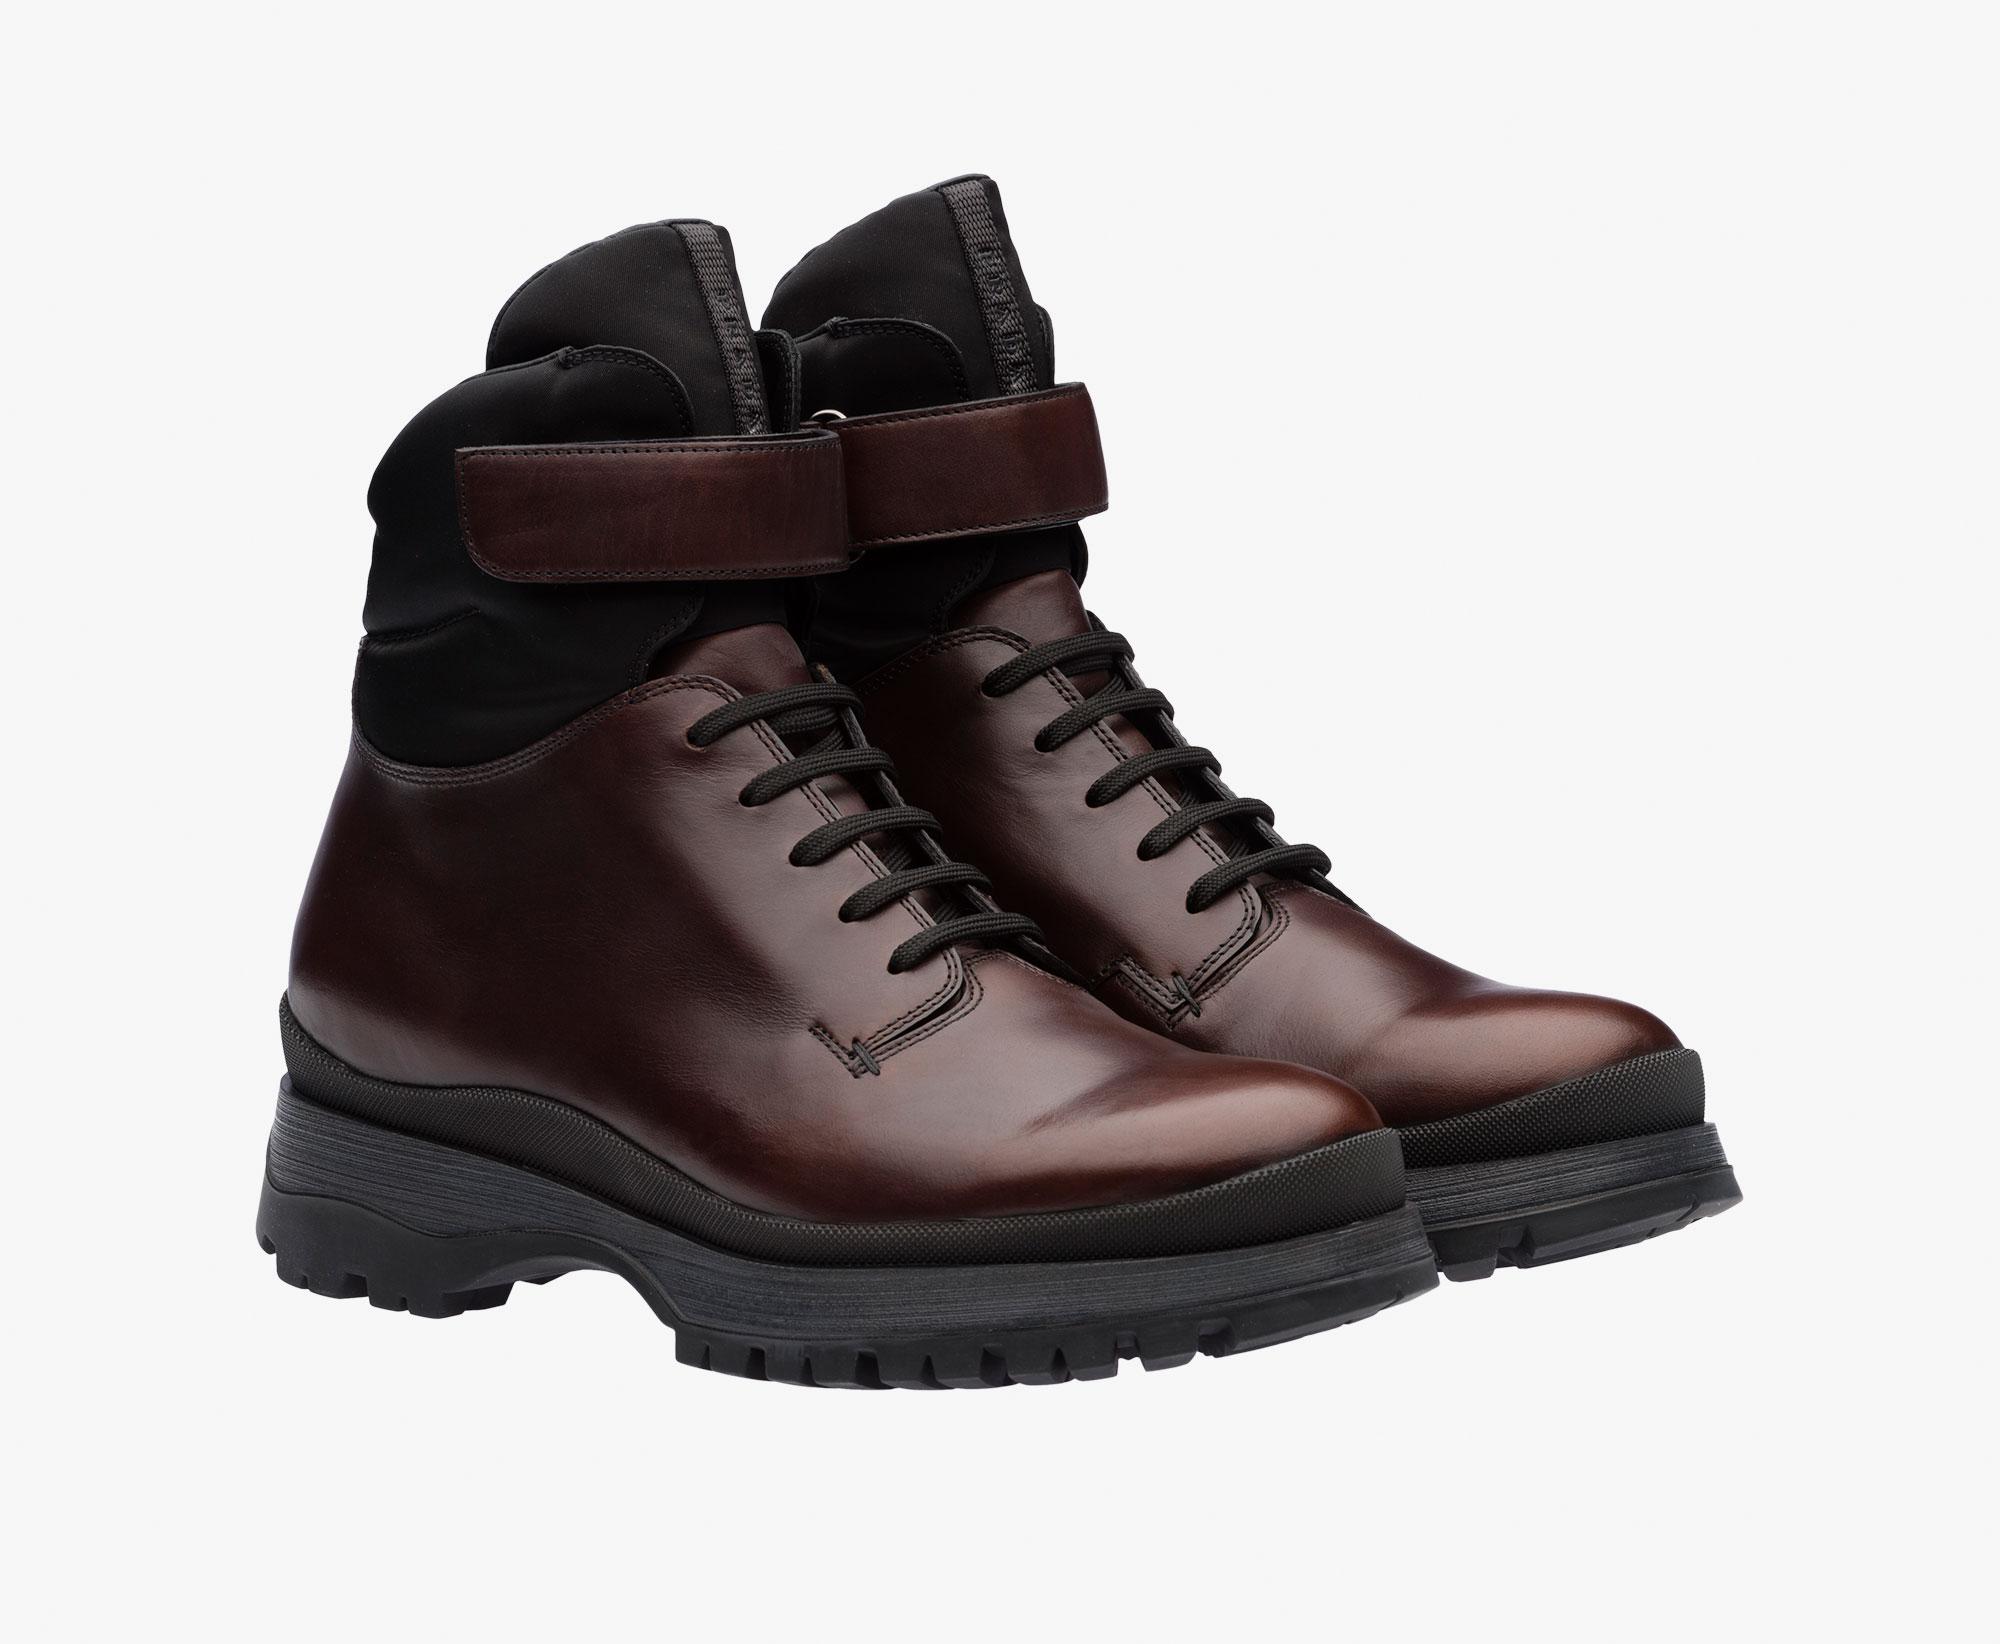 Prada Combat Ankle Boots in Brown for Men - Lyst